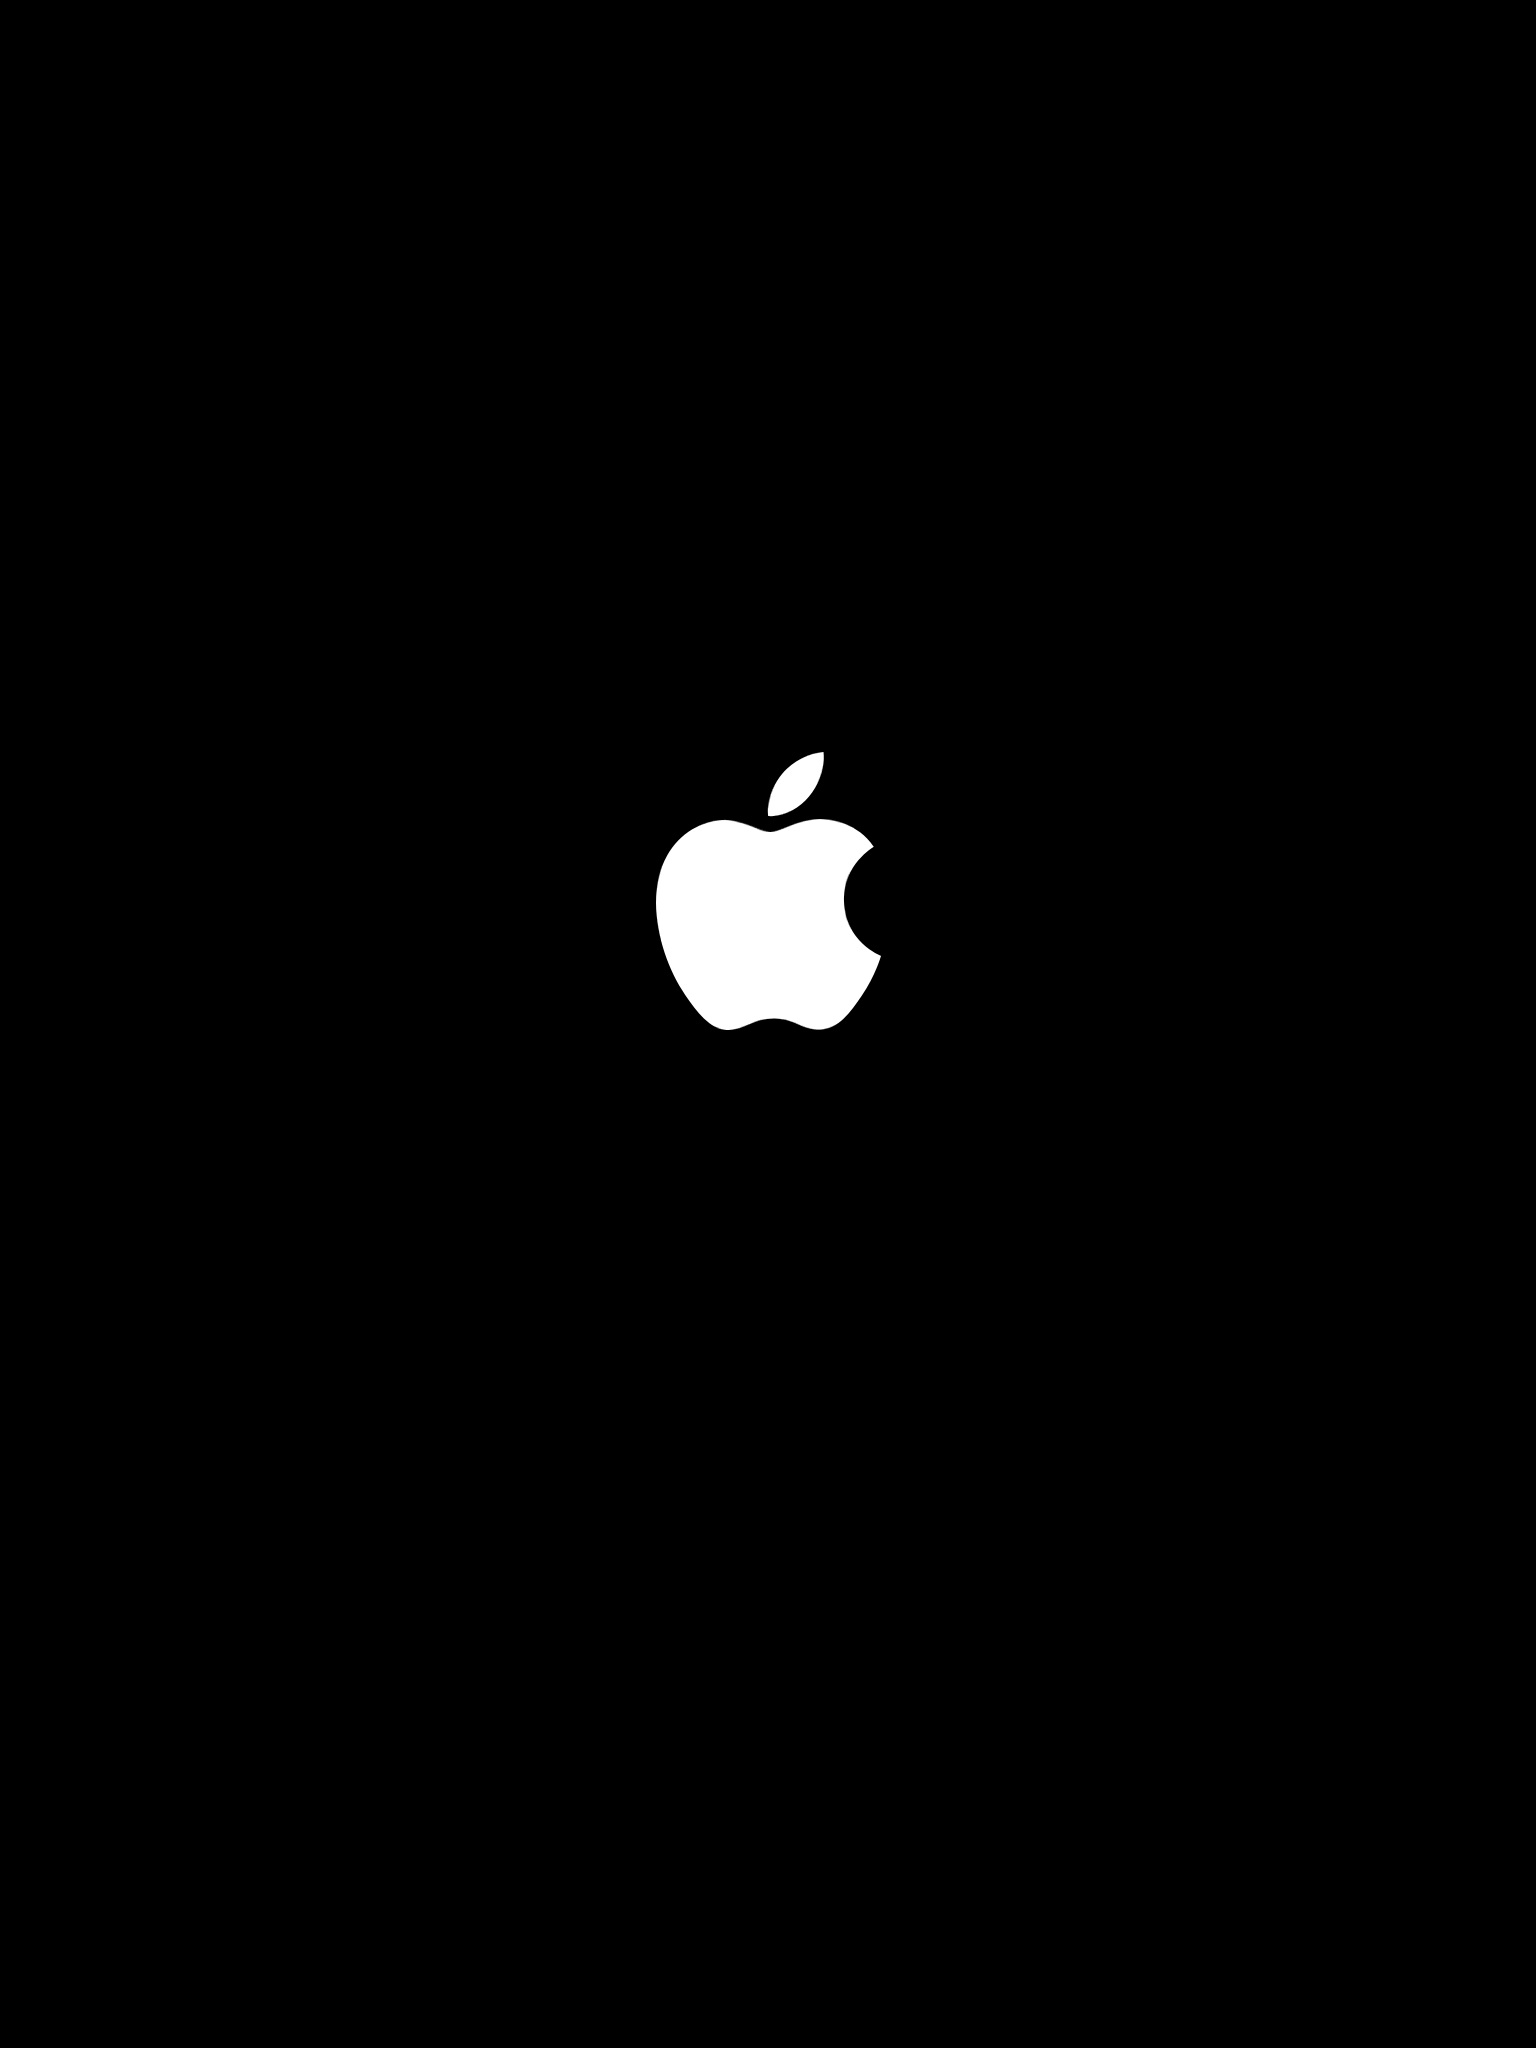 iPad air suddenly appears a black screen with apple logo | MacRumors Forums